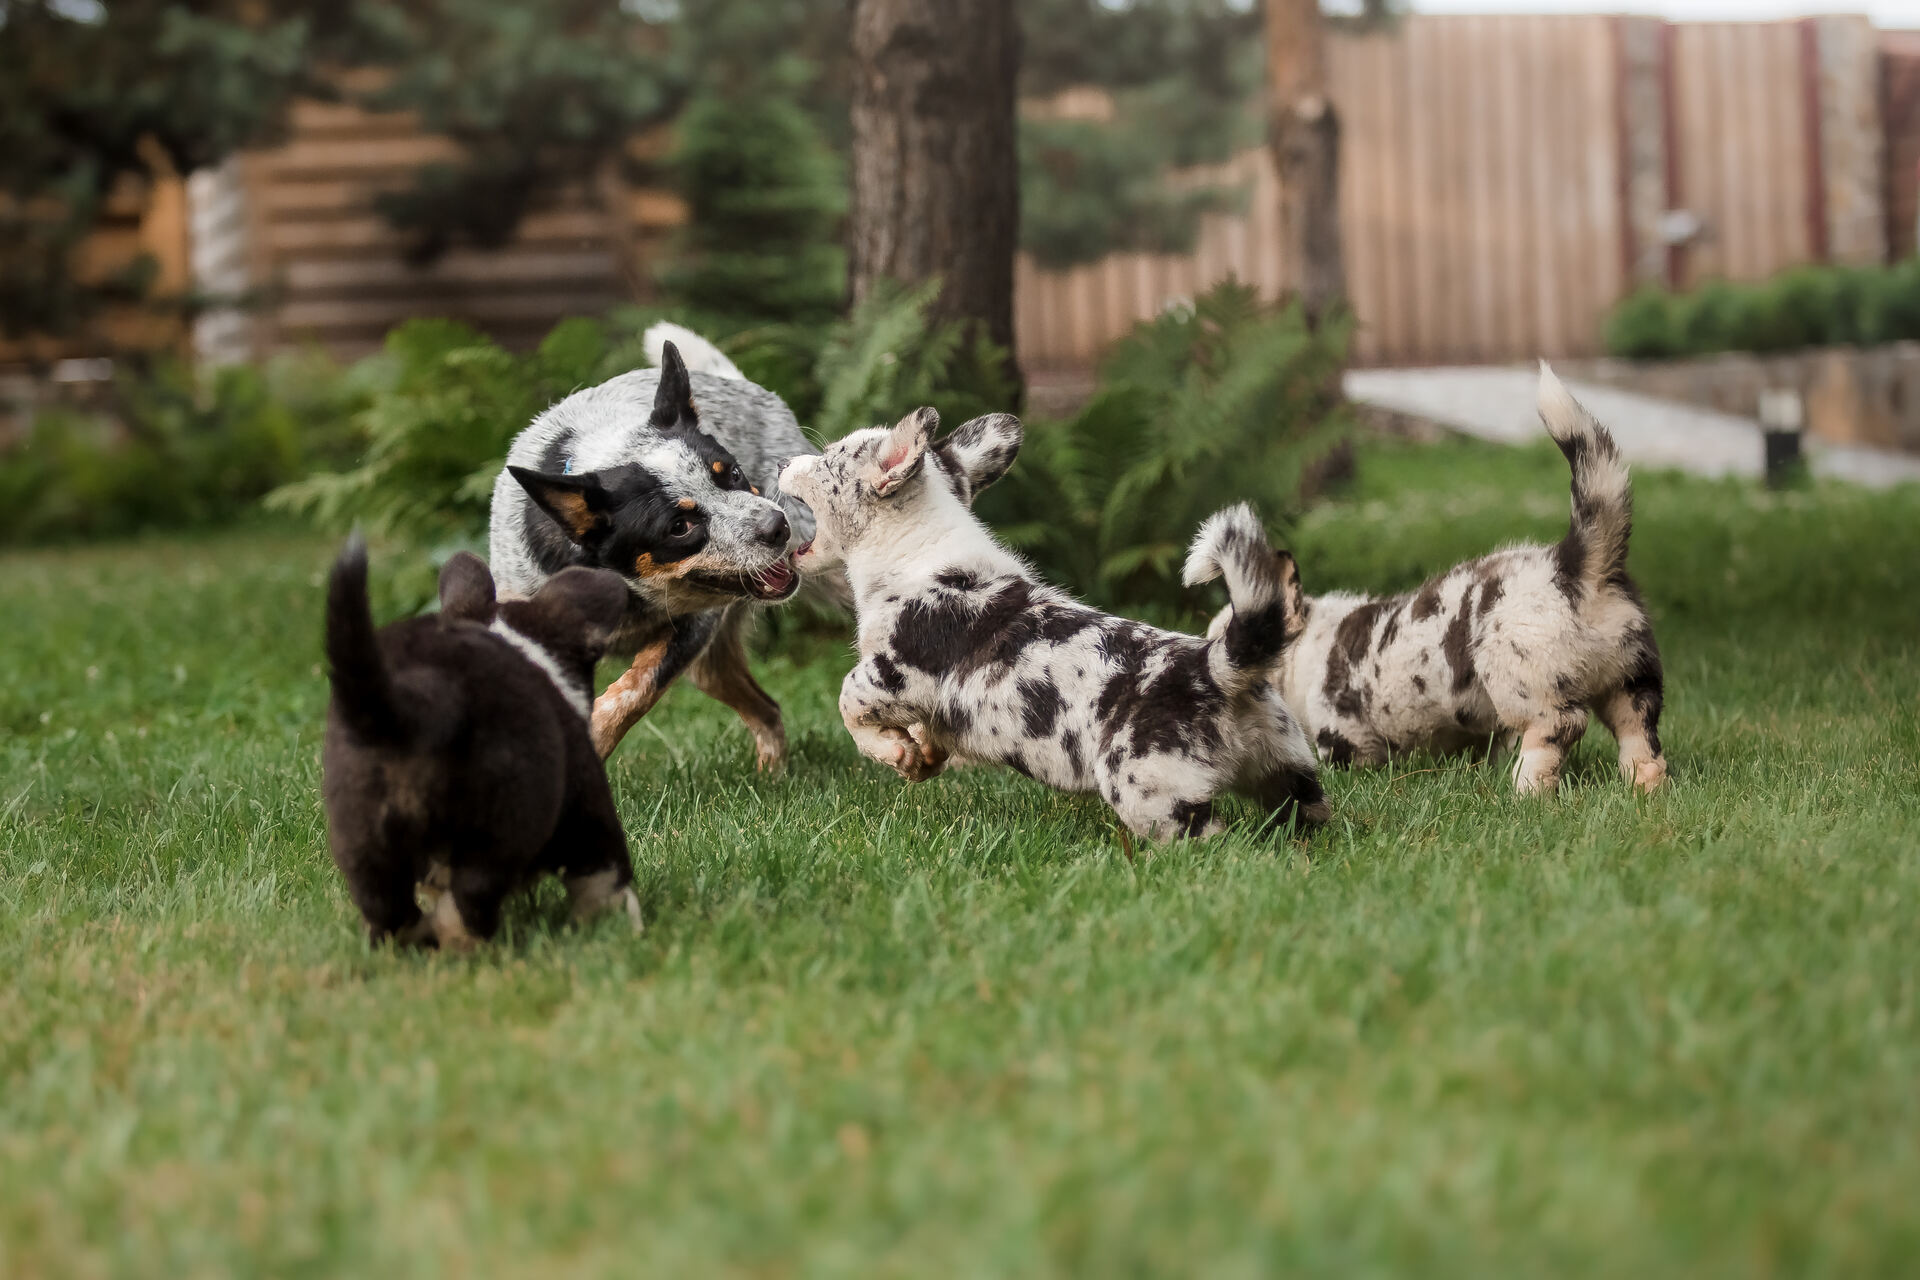 A pack of dogs playing in a lawn